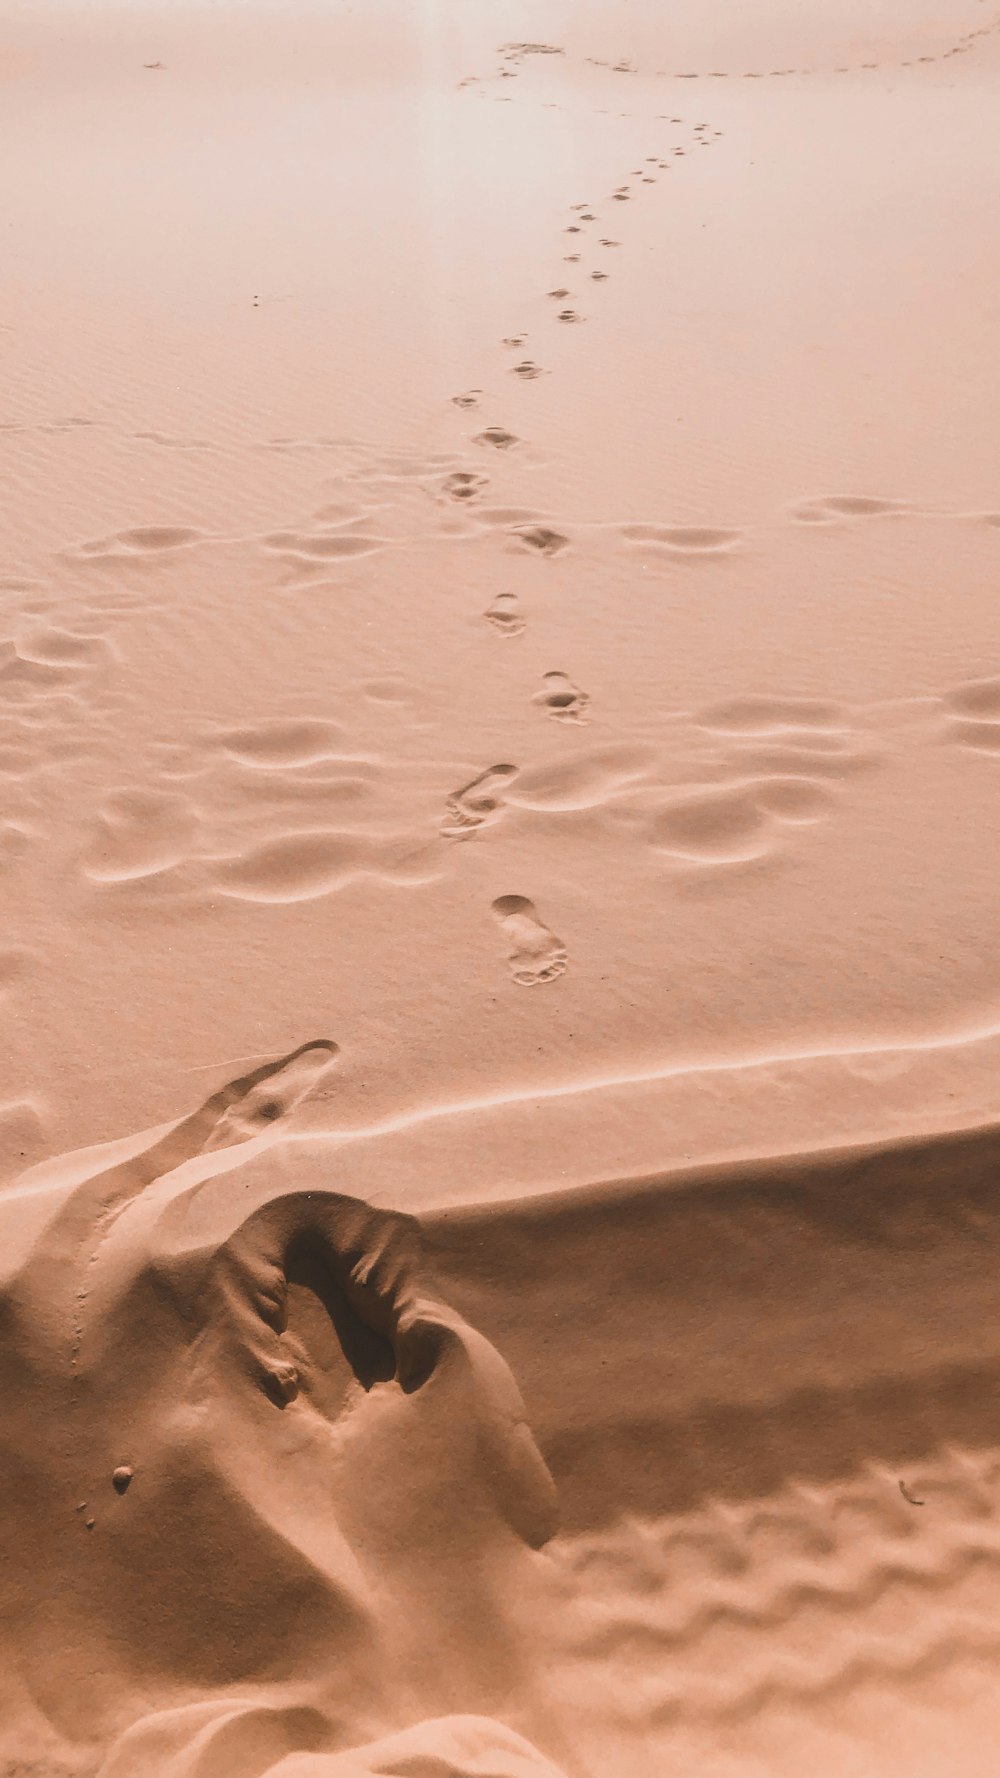 footprints in the sands